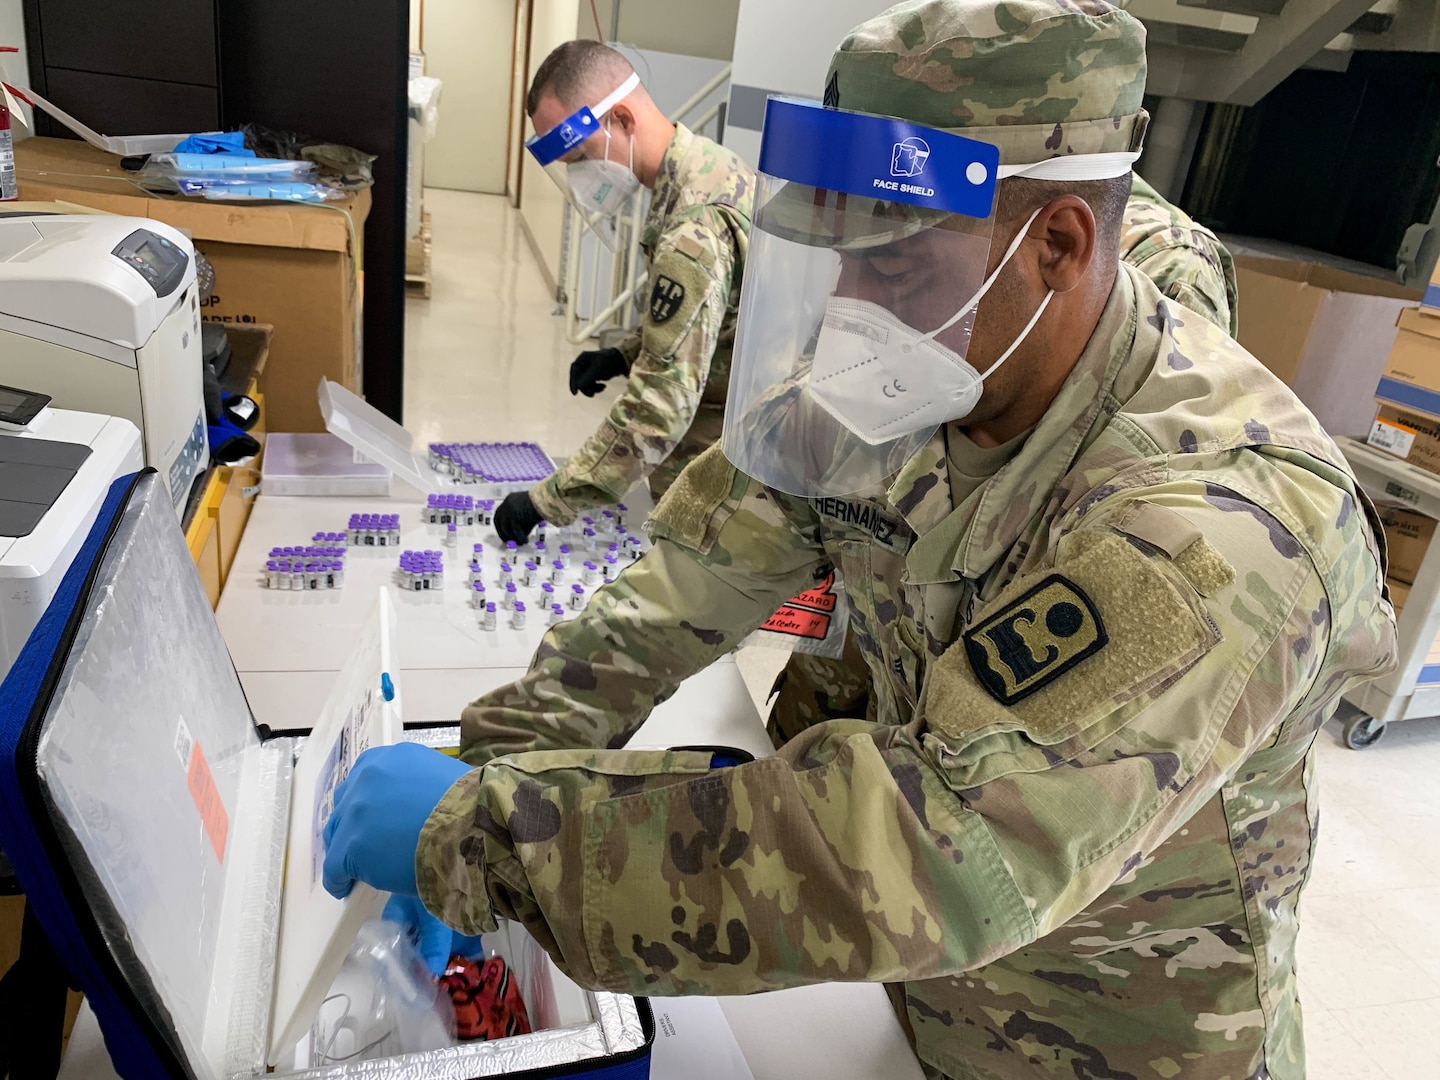 Sgt. Javier Hernández from Joint Task Force - Puerto Rico prepares COVID-19 vials for distribution in Ponce Jan. 19, 2021. The PRNG continued with the COVID-19 vaccine distribution process for Operation Warp Speed to support the Department of Health and the Centers for Disease Control and Prevention.